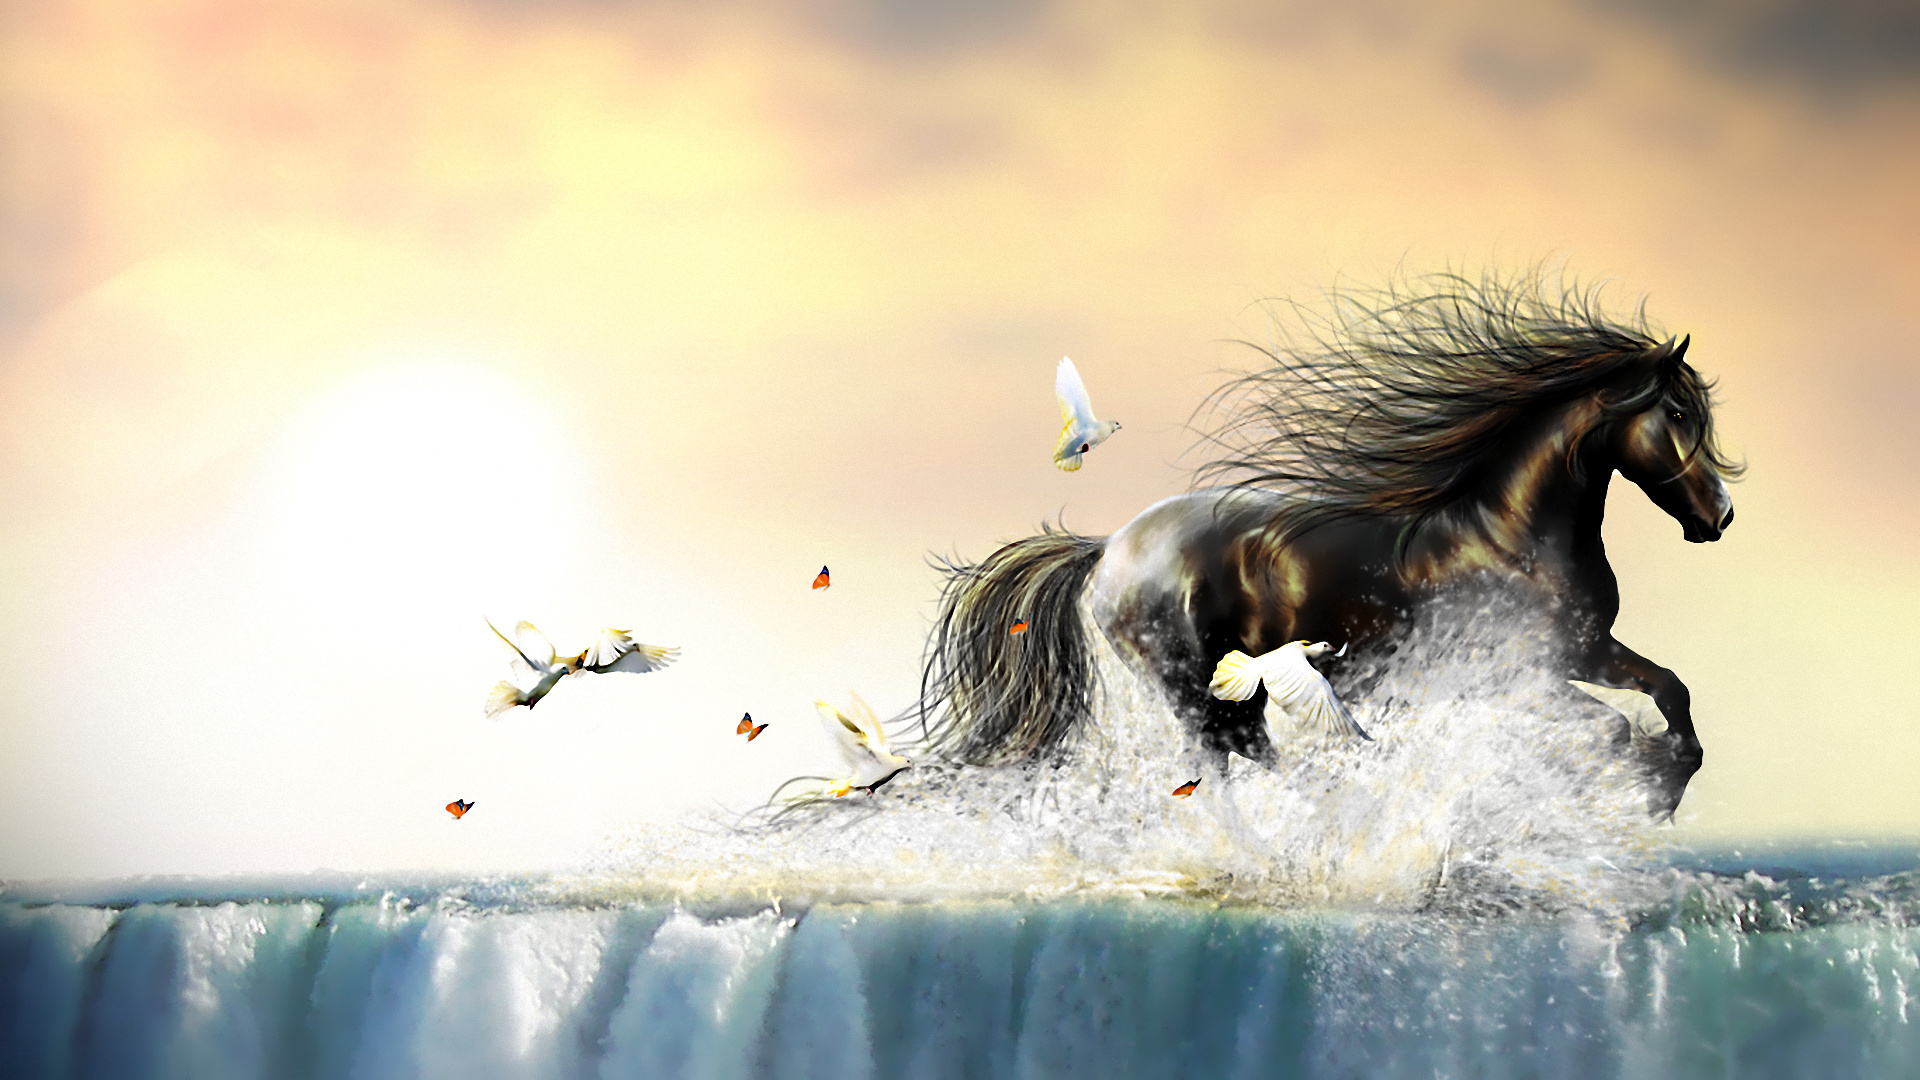 Painting Of Horse Running Through Water - HD Wallpaper 